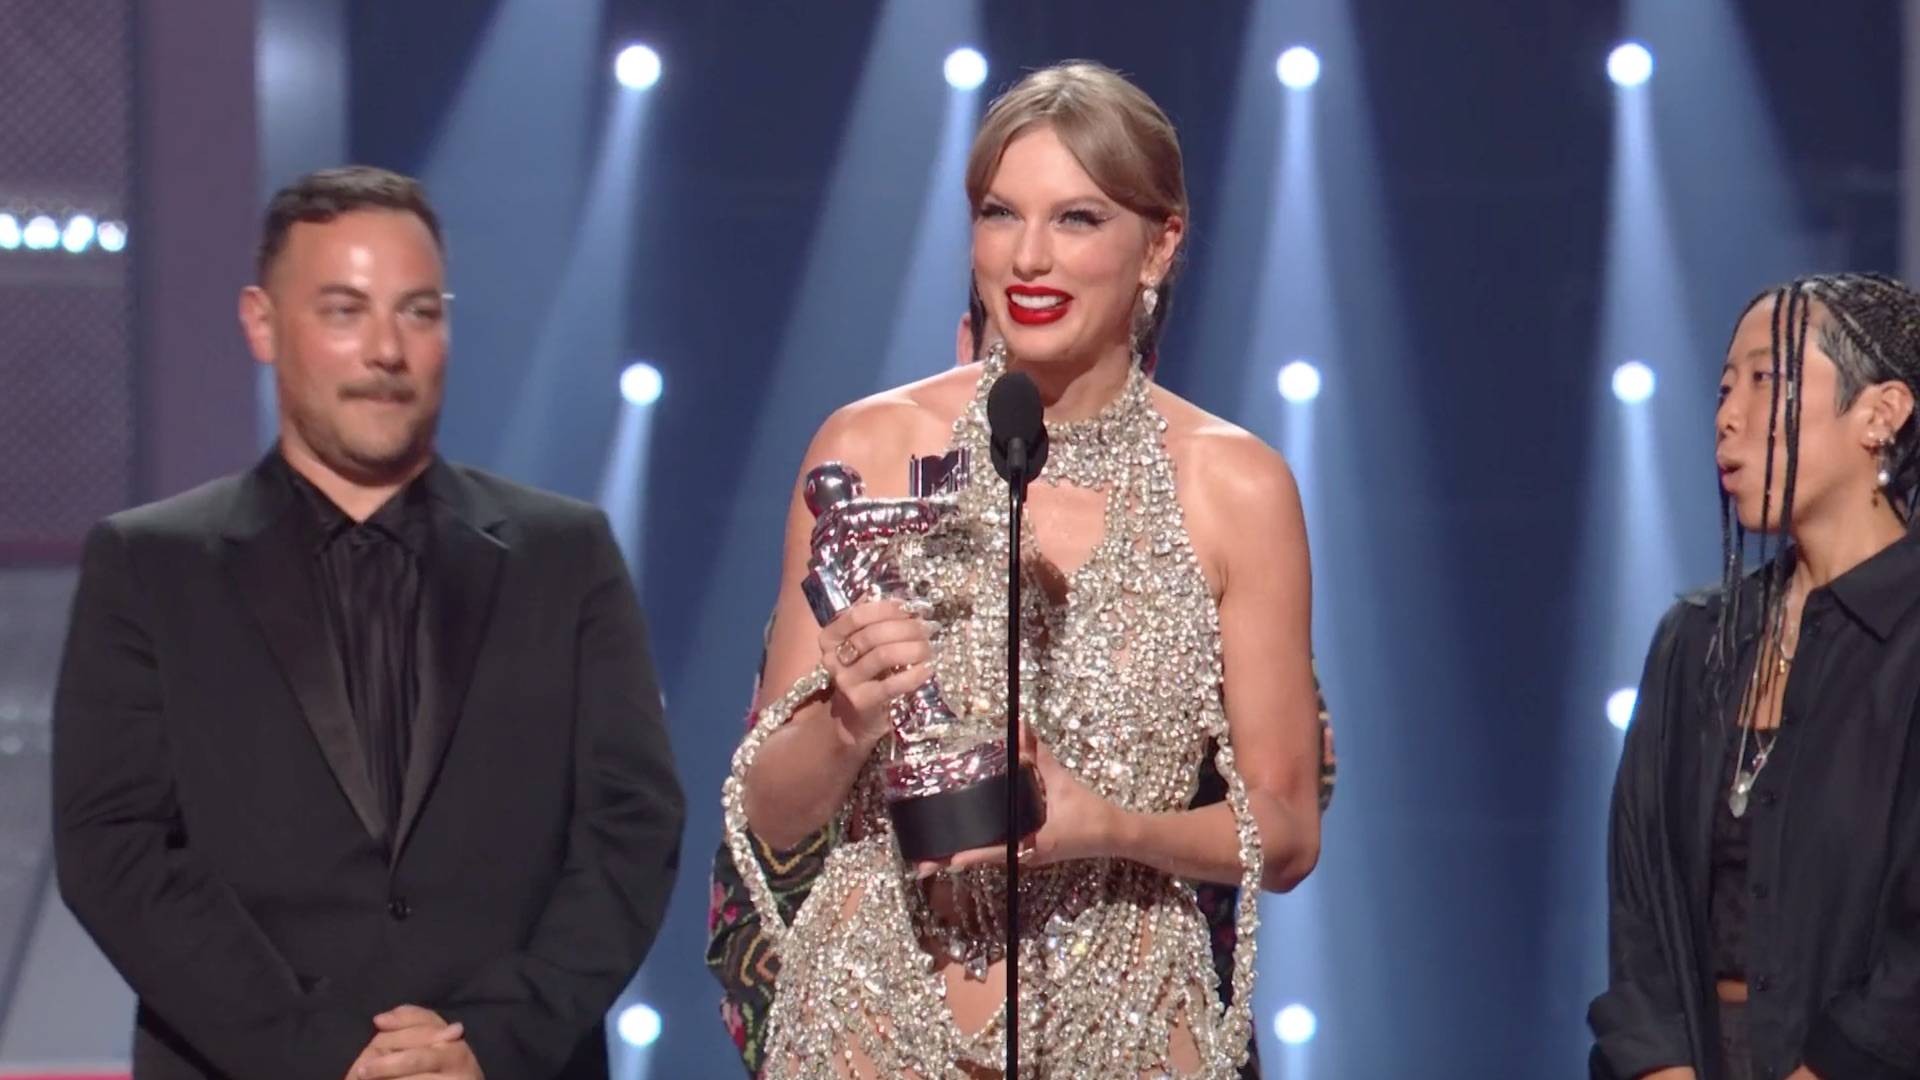 Taylor Swift accepts the award for Video of the Year Award at the VMAs 2022.